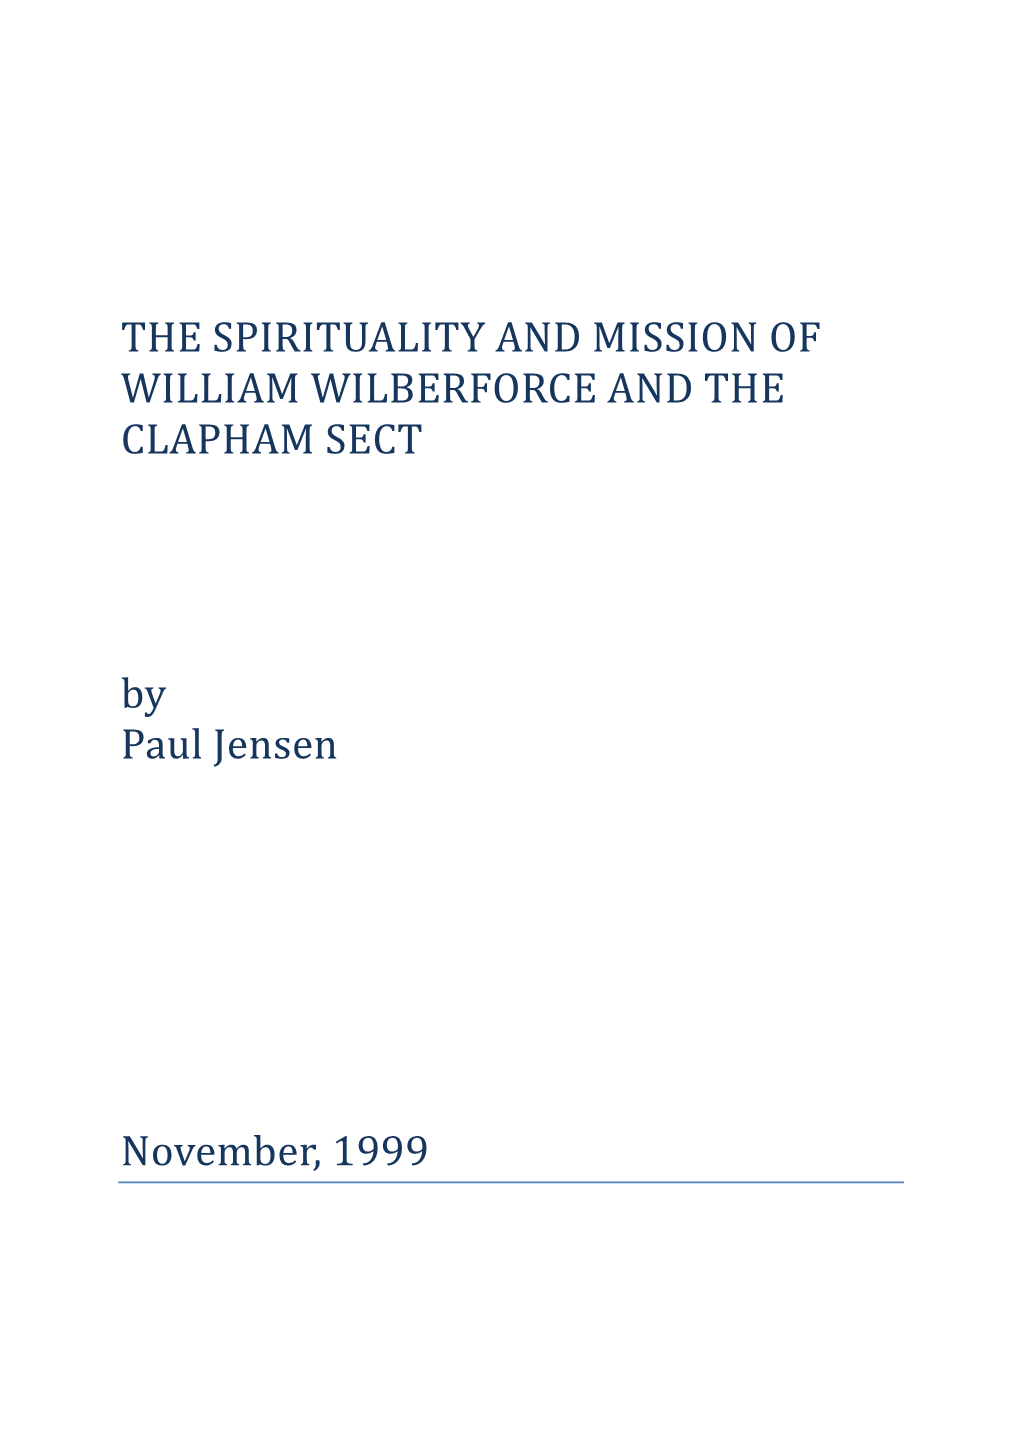 The Spirituality and Mission of William Wilberforce and the Clapham Sect